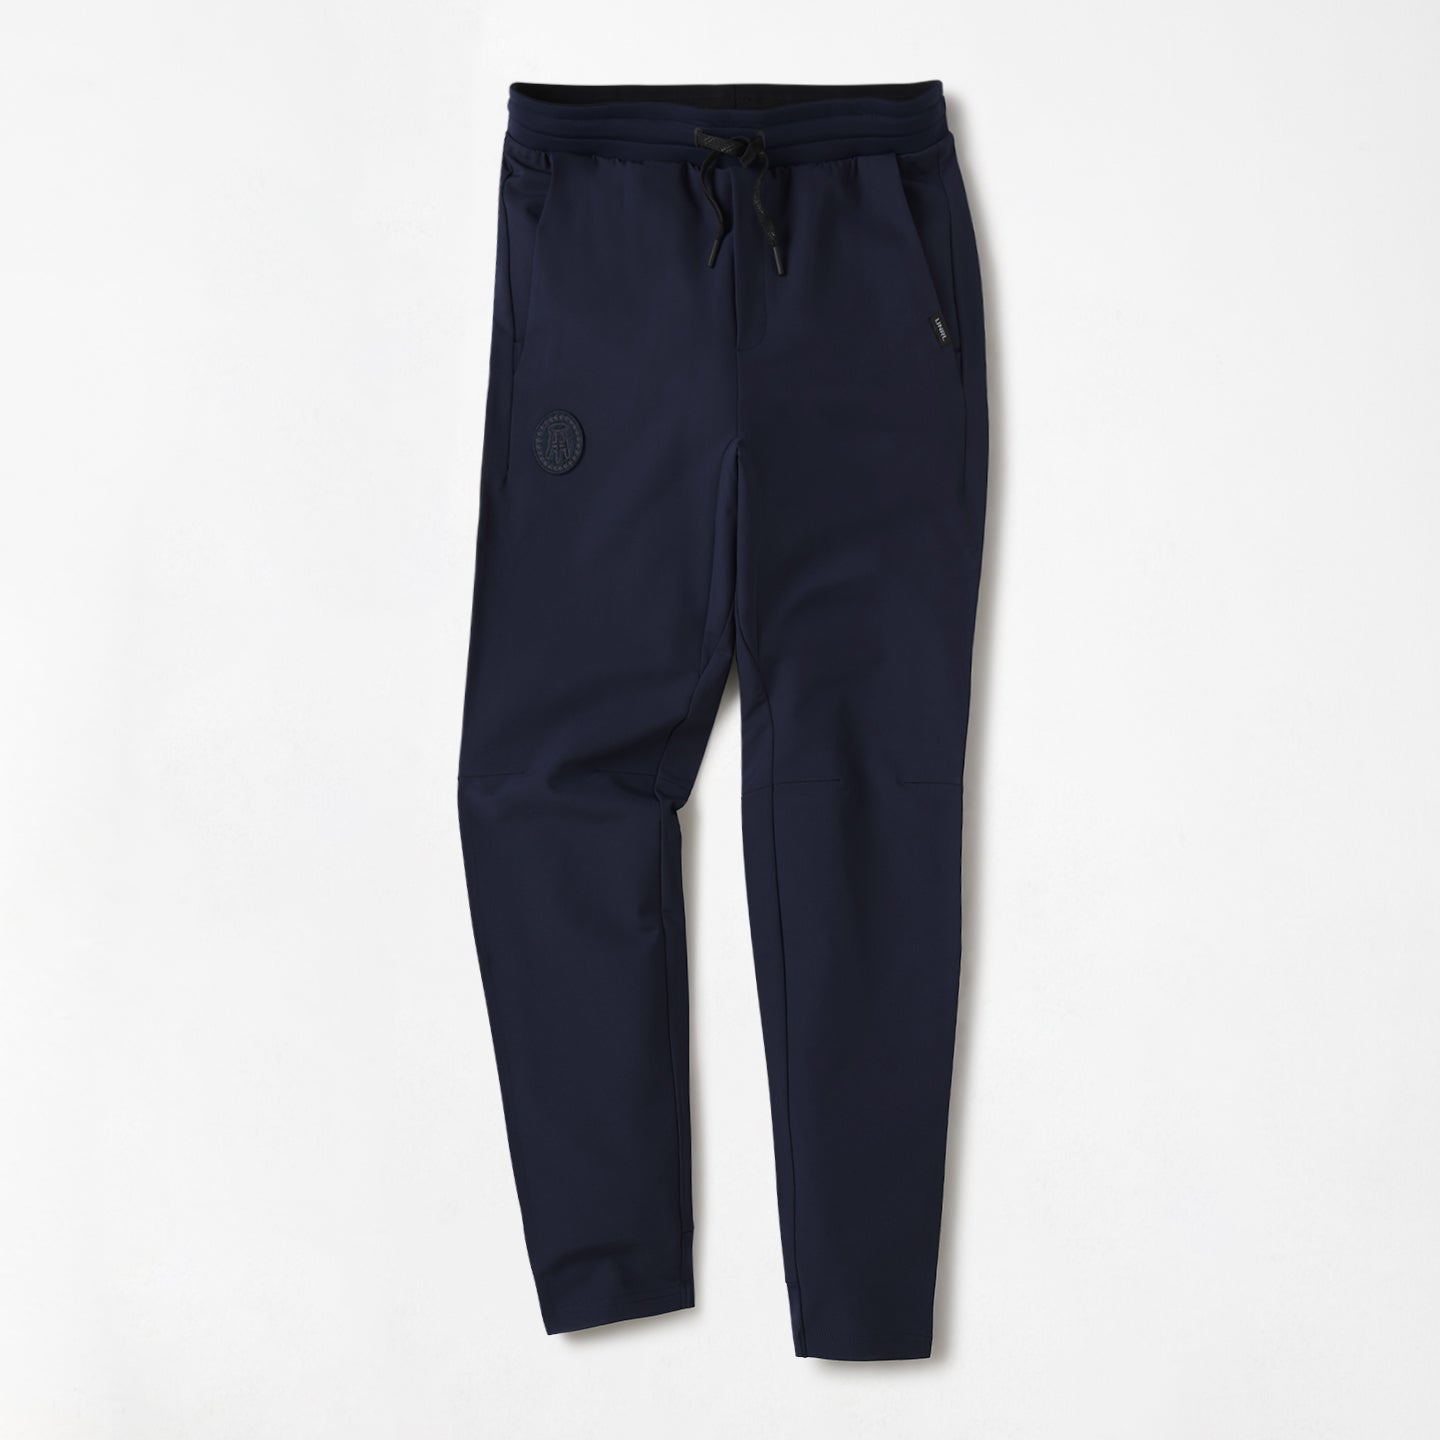 UNRL x Barstool Sports Performance Pants-Pants-Fore Play-Navy-S-Barstool Sports